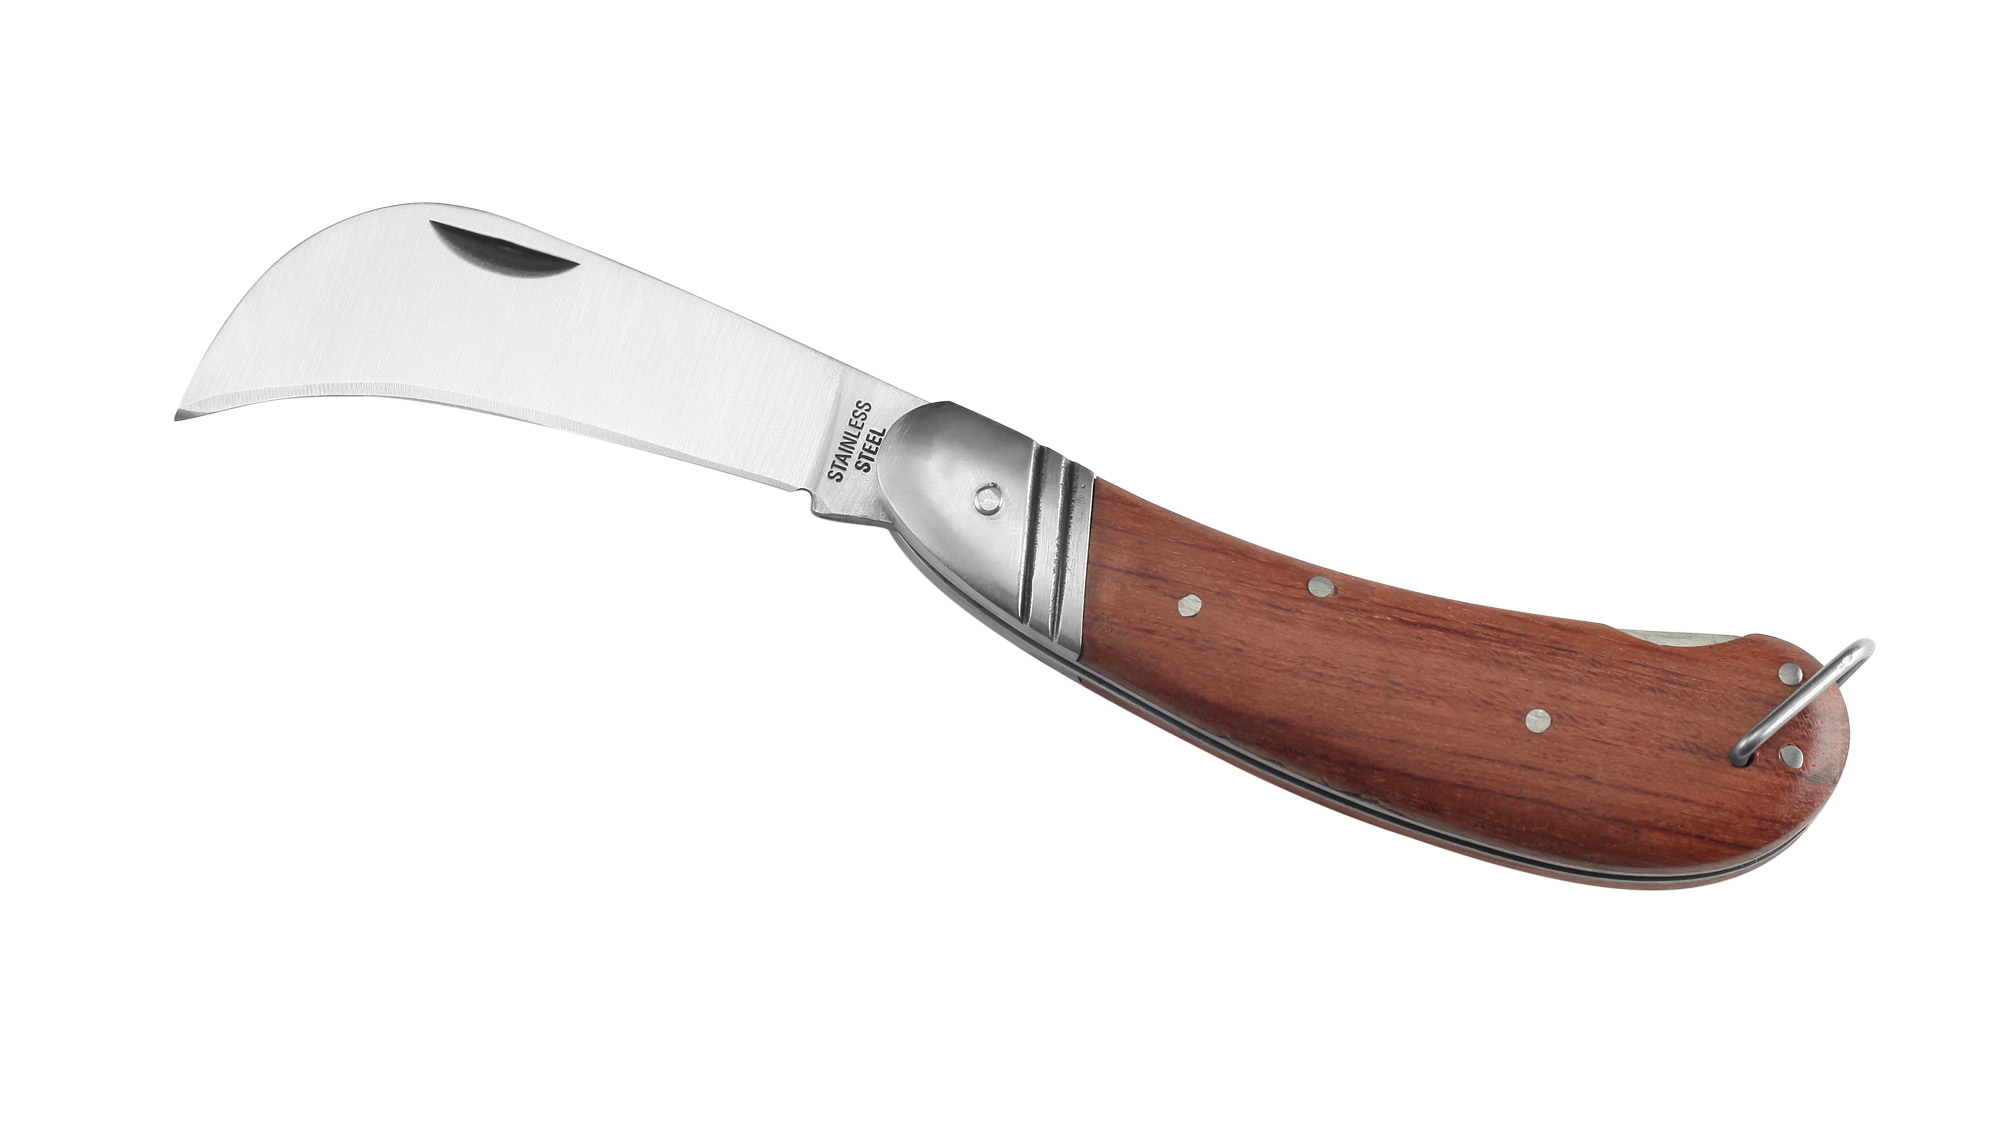 hotsale all over the world wooden handle budding knife